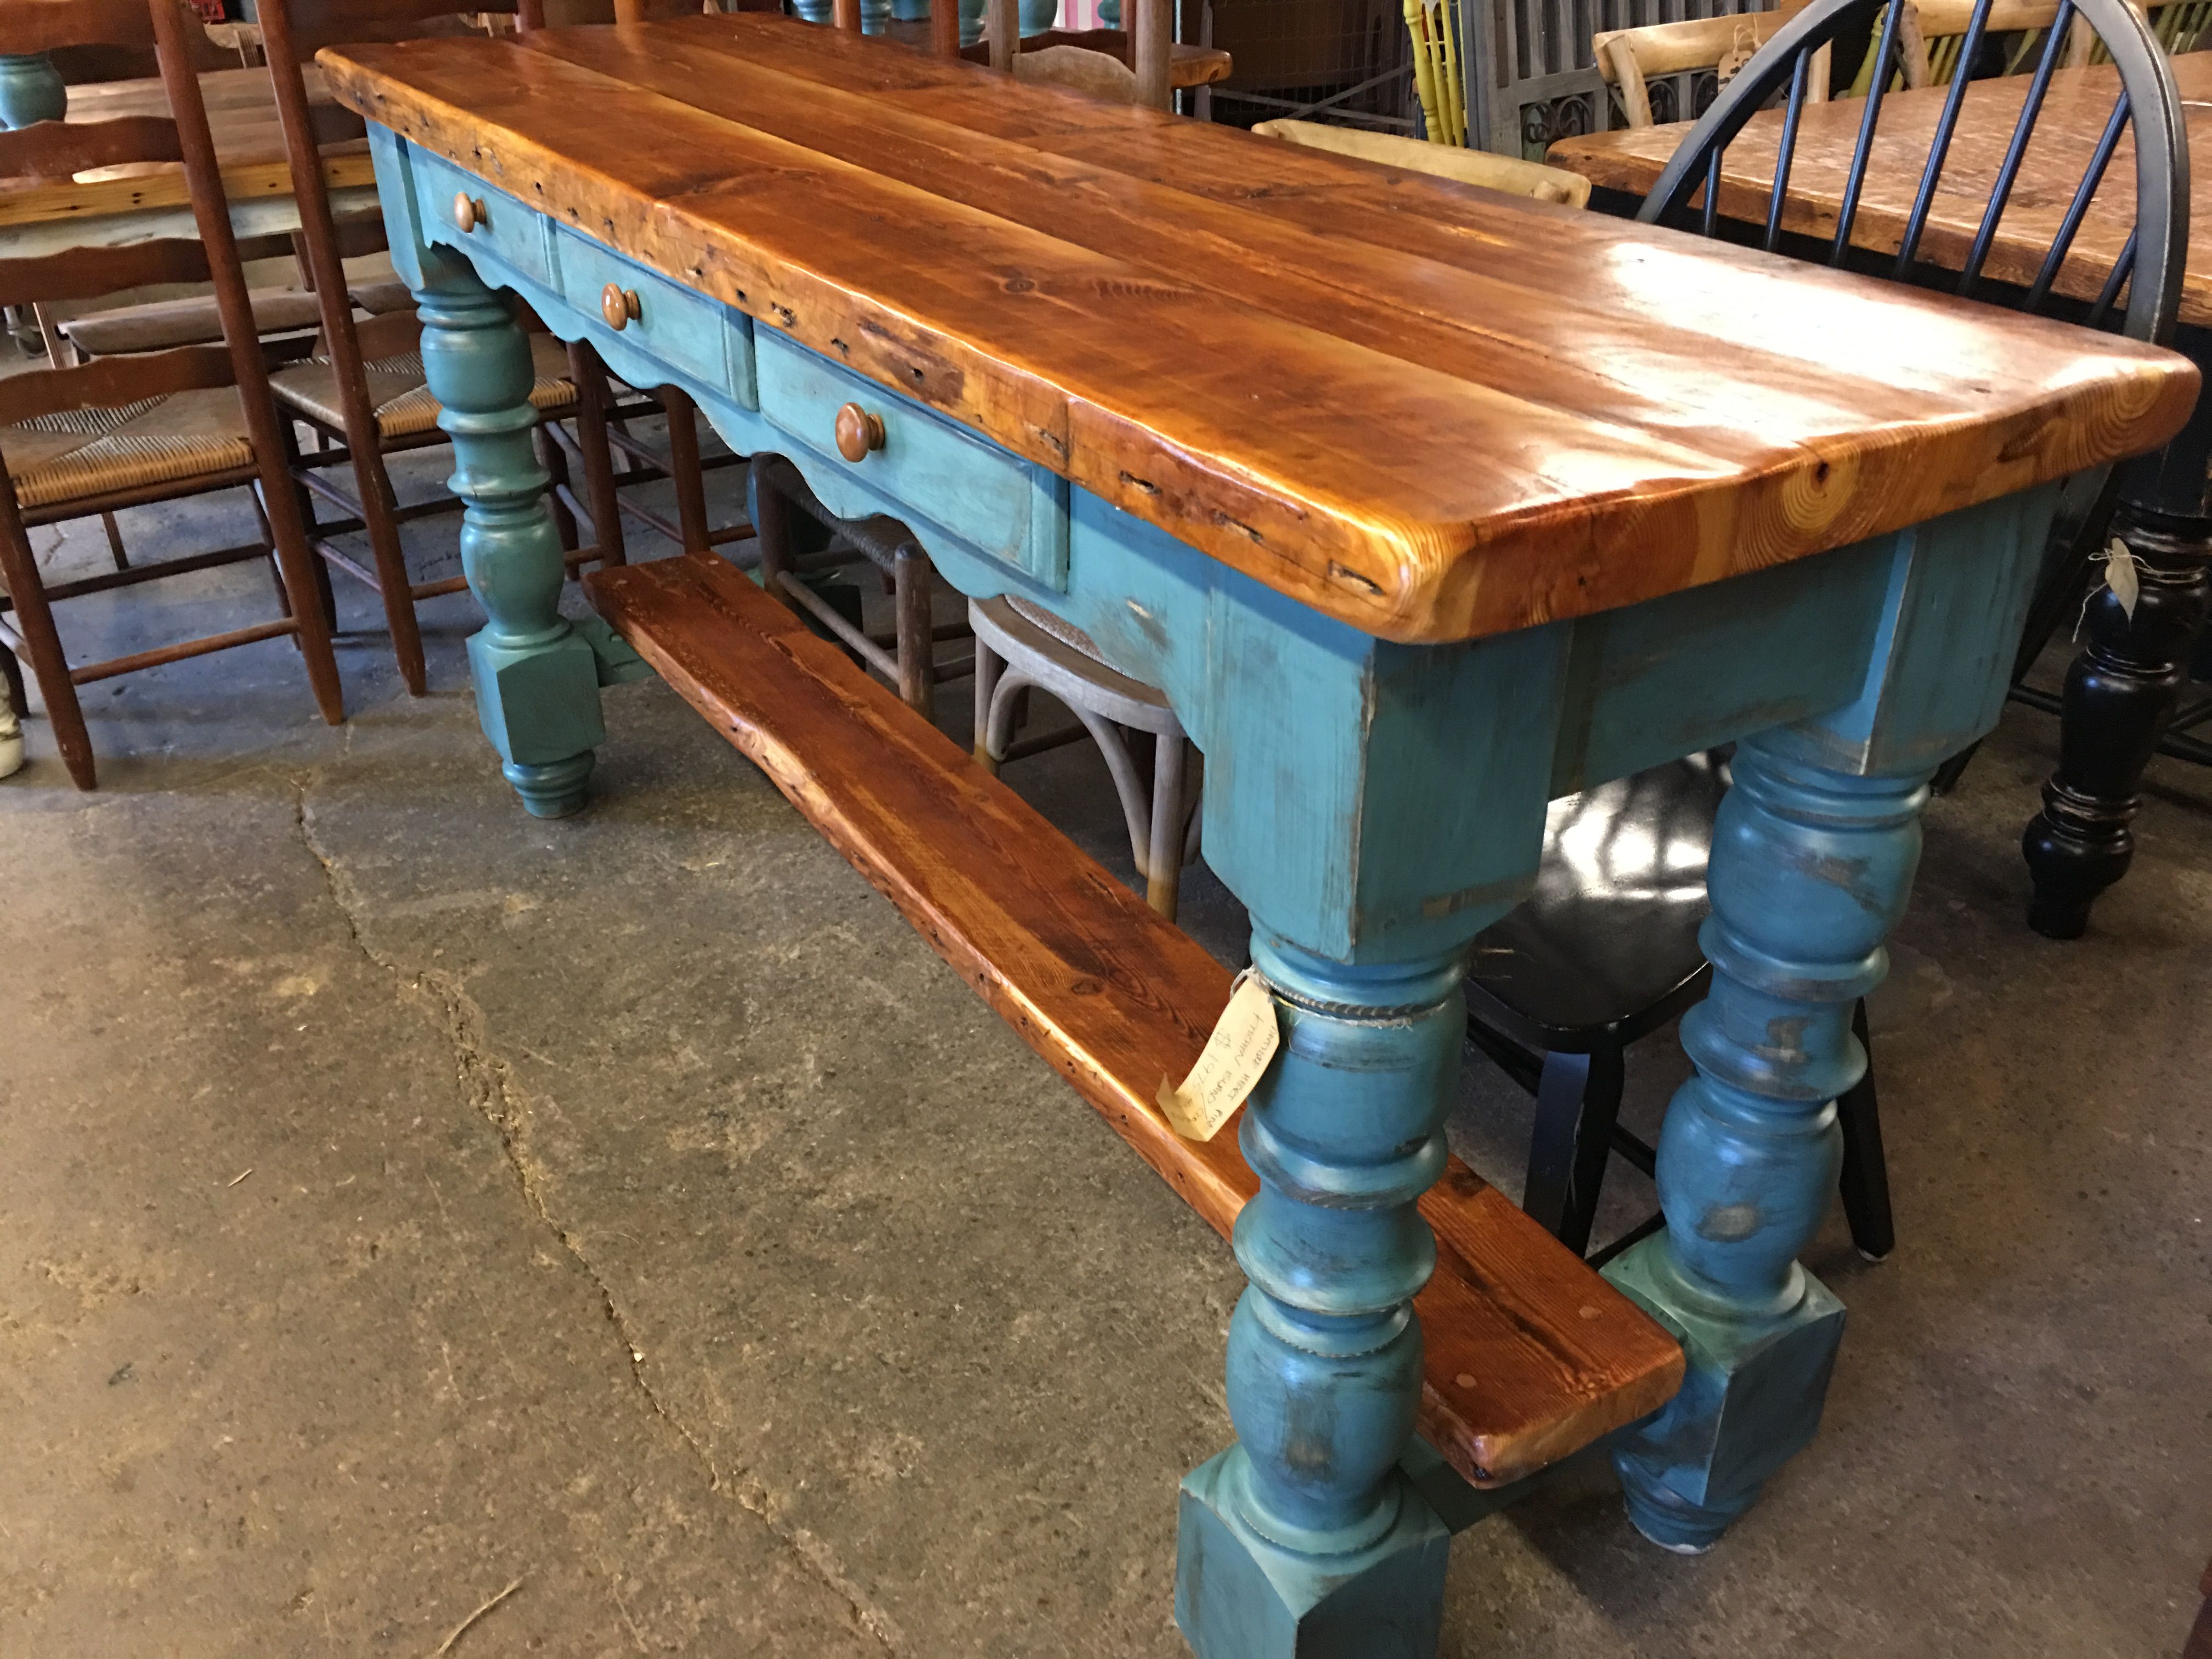 Buy Hand Crafted Antique Heart Pine Kitchen Island, made to order from